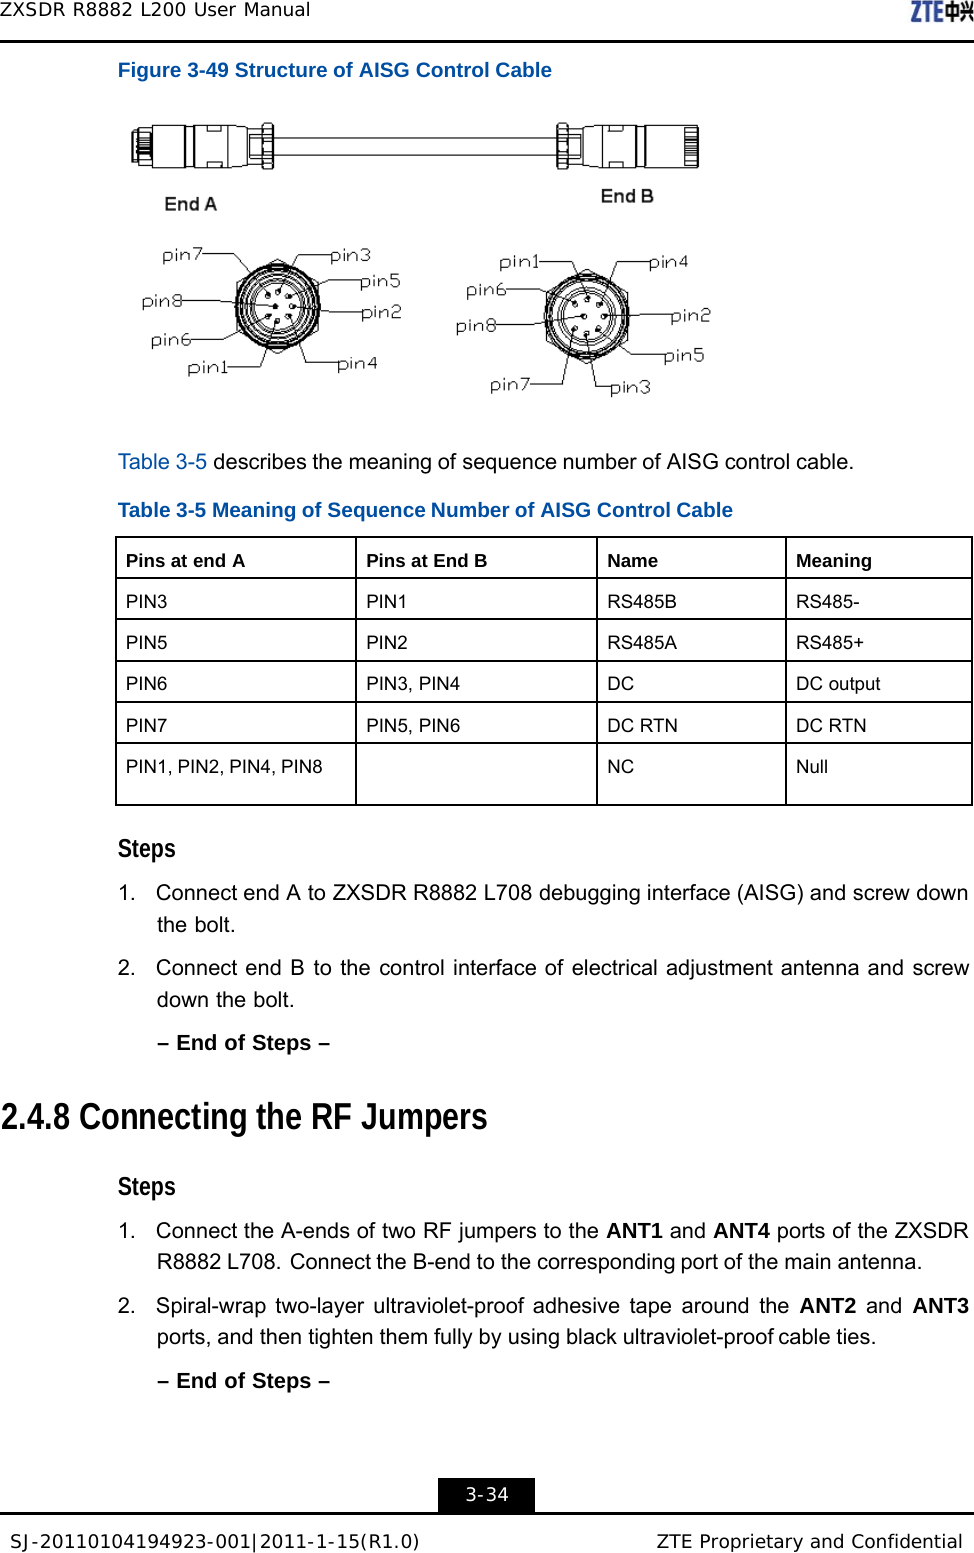 SJ-20110104194923-001|2011-1-15(R1.0) ZTE Proprietary and Confidential ZXSDR R8882 L200 User Manual    Figure 3-49 Structure of AISG Control Cable    Table 3-5 describes the meaning of sequence number of AISG control cable.  Table 3-5 Meaning of Sequence Number of AISG Control Cable   Pins at end A  Pins at End B Name  Meaning  PIN3  PIN1 RS485B  RS485-  PIN5  PIN2 RS485A  RS485+  PIN6  PIN3, PIN4 DC  DC output  PIN7  PIN5, PIN6 DC RTN  DC RTN  PIN1, PIN2, PIN4, PIN8  NC  Null  Steps  1.  Connect end A to ZXSDR R8882 L708 debugging interface (AISG) and screw down the bolt.  2.  Connect end B to the control interface of electrical adjustment antenna and screw down the bolt.  – End of Steps –   2.4.8 Connecting the RF Jumpers   Steps  1.  Connect the A-ends of two RF jumpers to the ANT1 and ANT4 ports of the ZXSDR R8882 L708. Connect the B-end to the corresponding port of the main antenna.  2.  Spiral-wrap two-layer ultraviolet-proof adhesive tape around the ANT2  and  ANT3 ports, and then tighten them fully by using black ultraviolet-proof cable ties.  – End of Steps –     3-34 